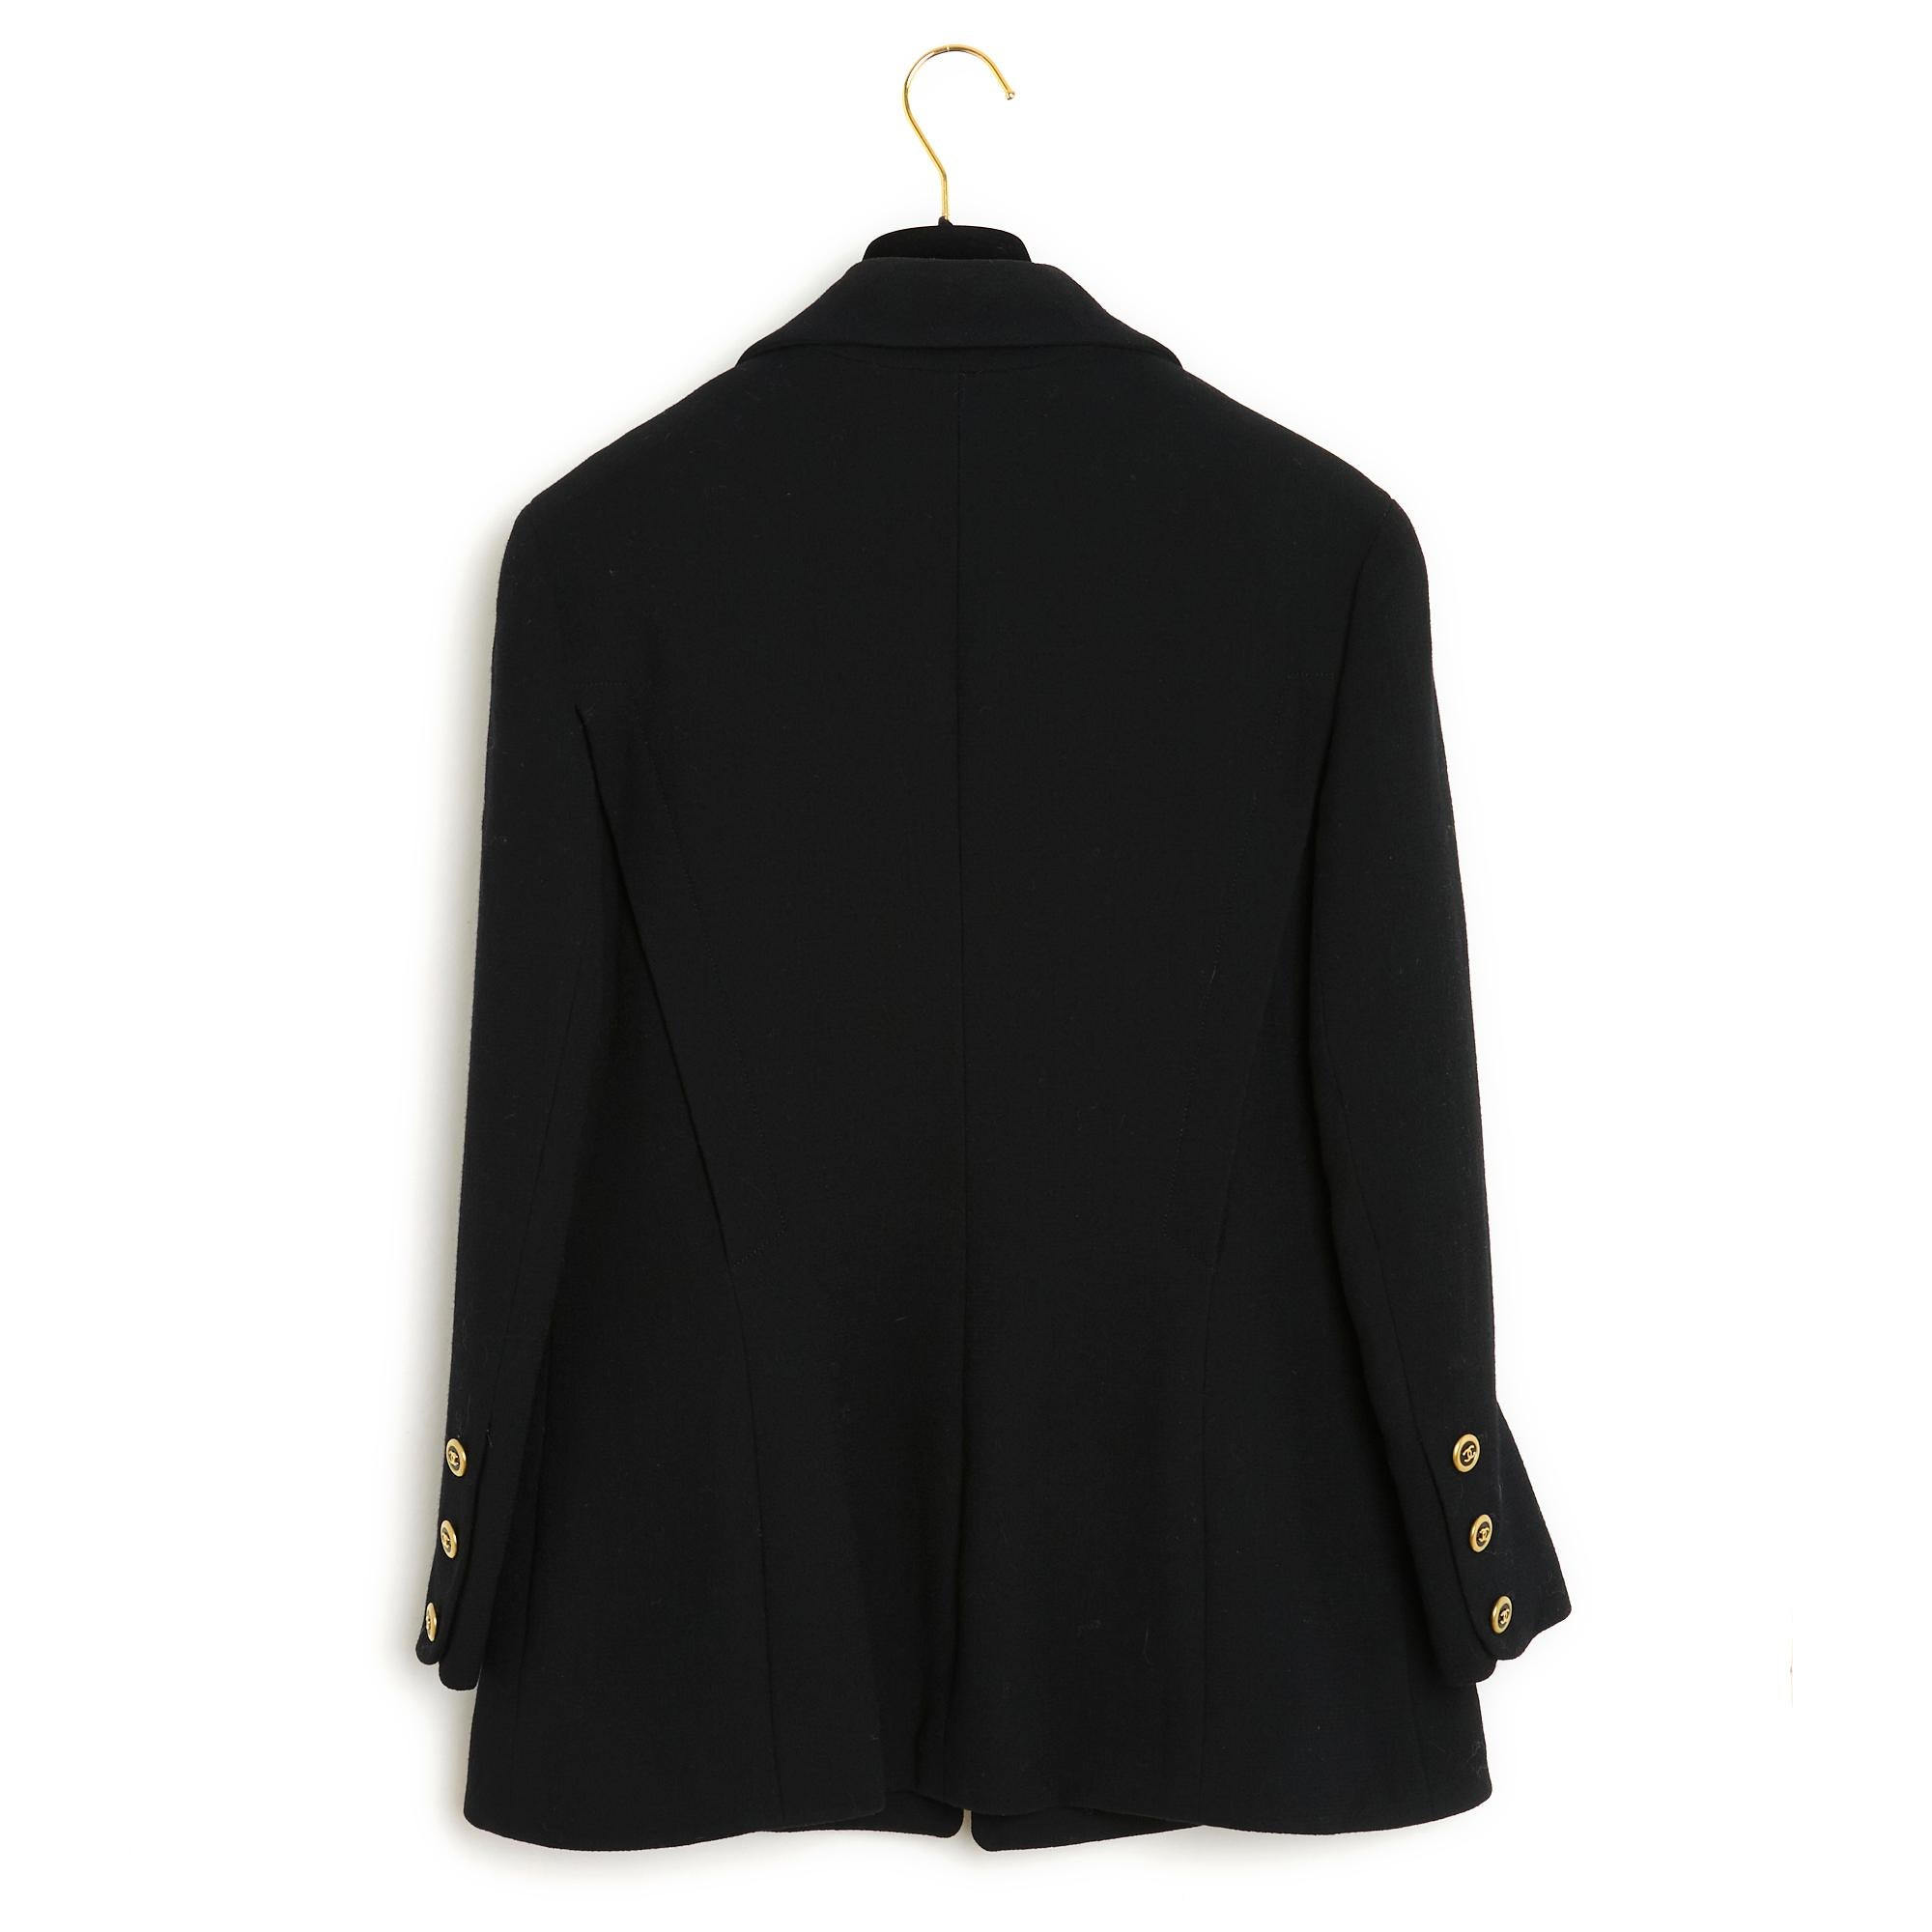 Late 80s Chanel black Wool Classic 'CC' Jacket Ensemble FR40 US10 For Sale 4